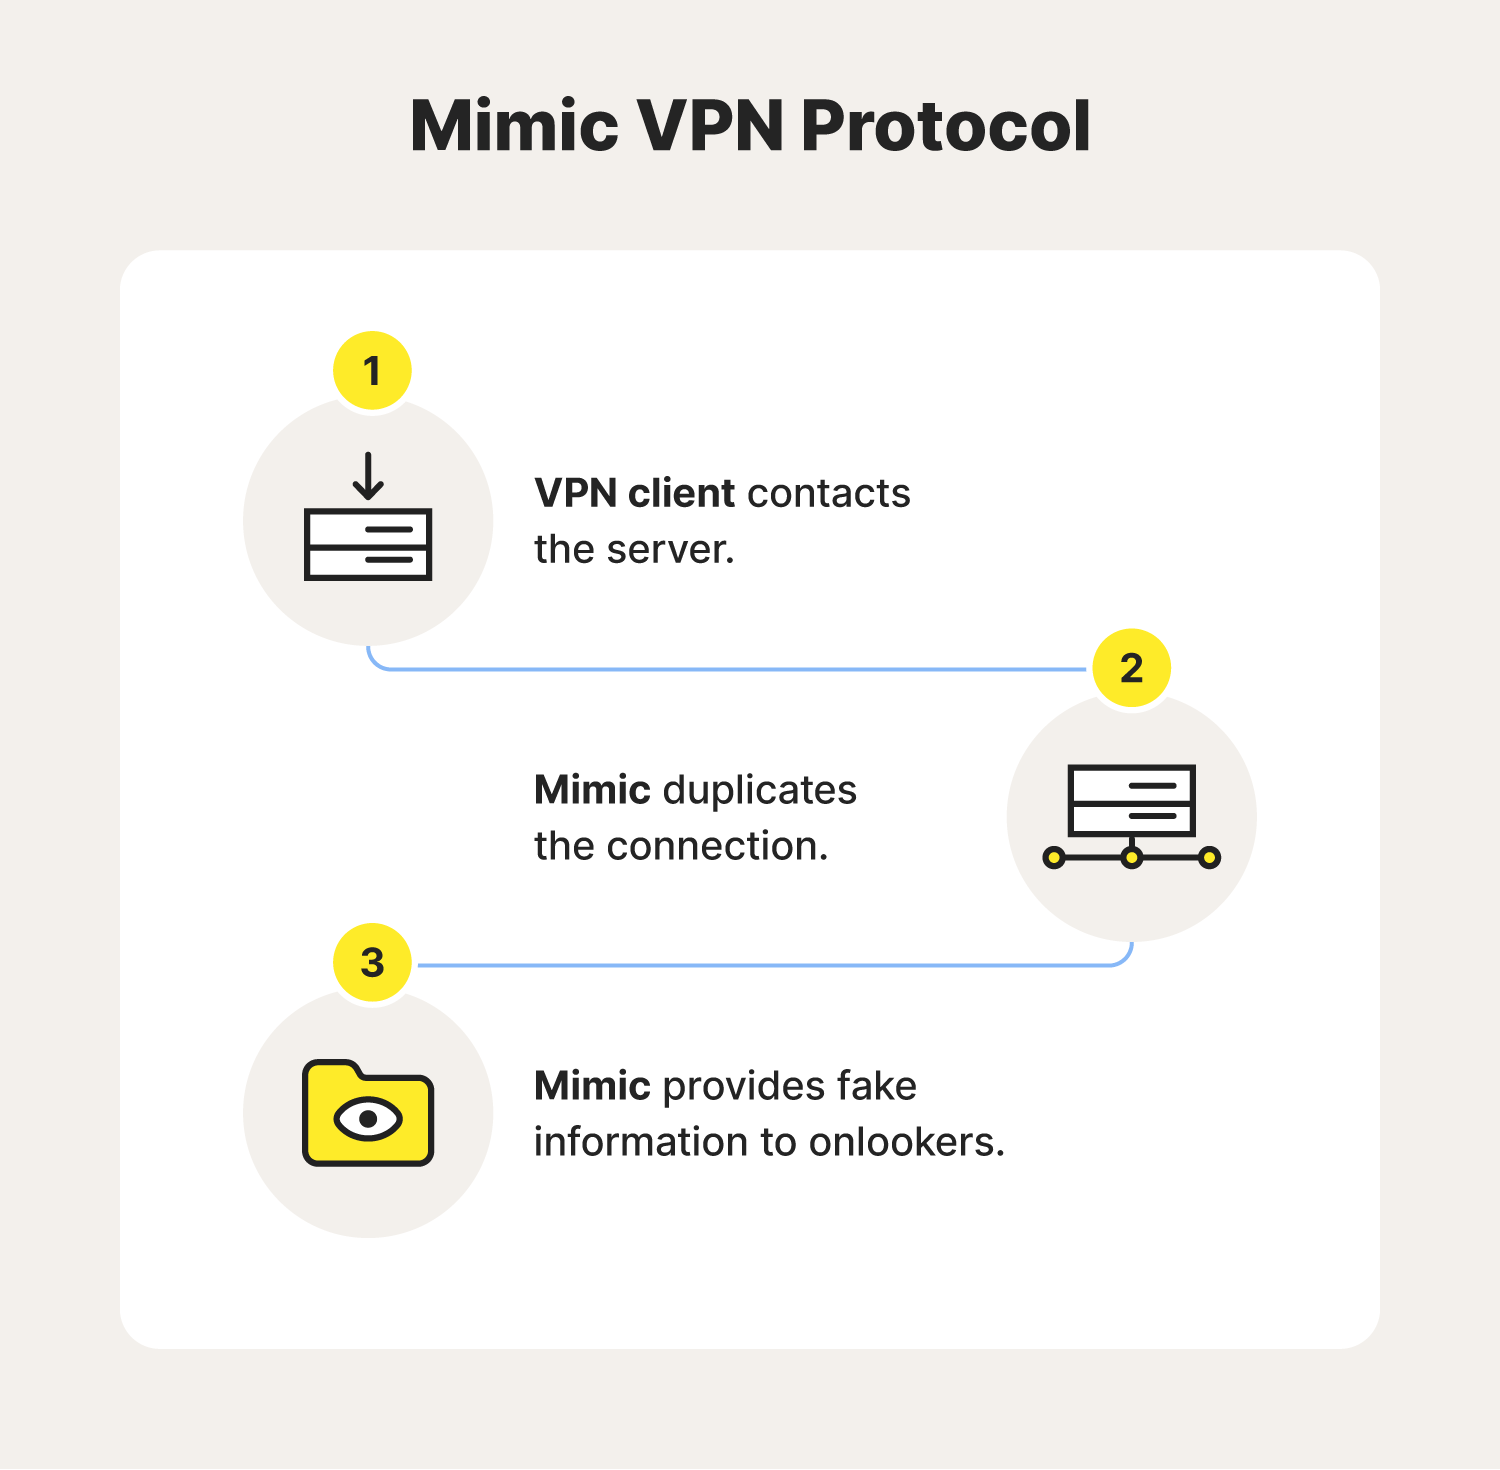  An explanation of how the Mimic VPN protocol works.